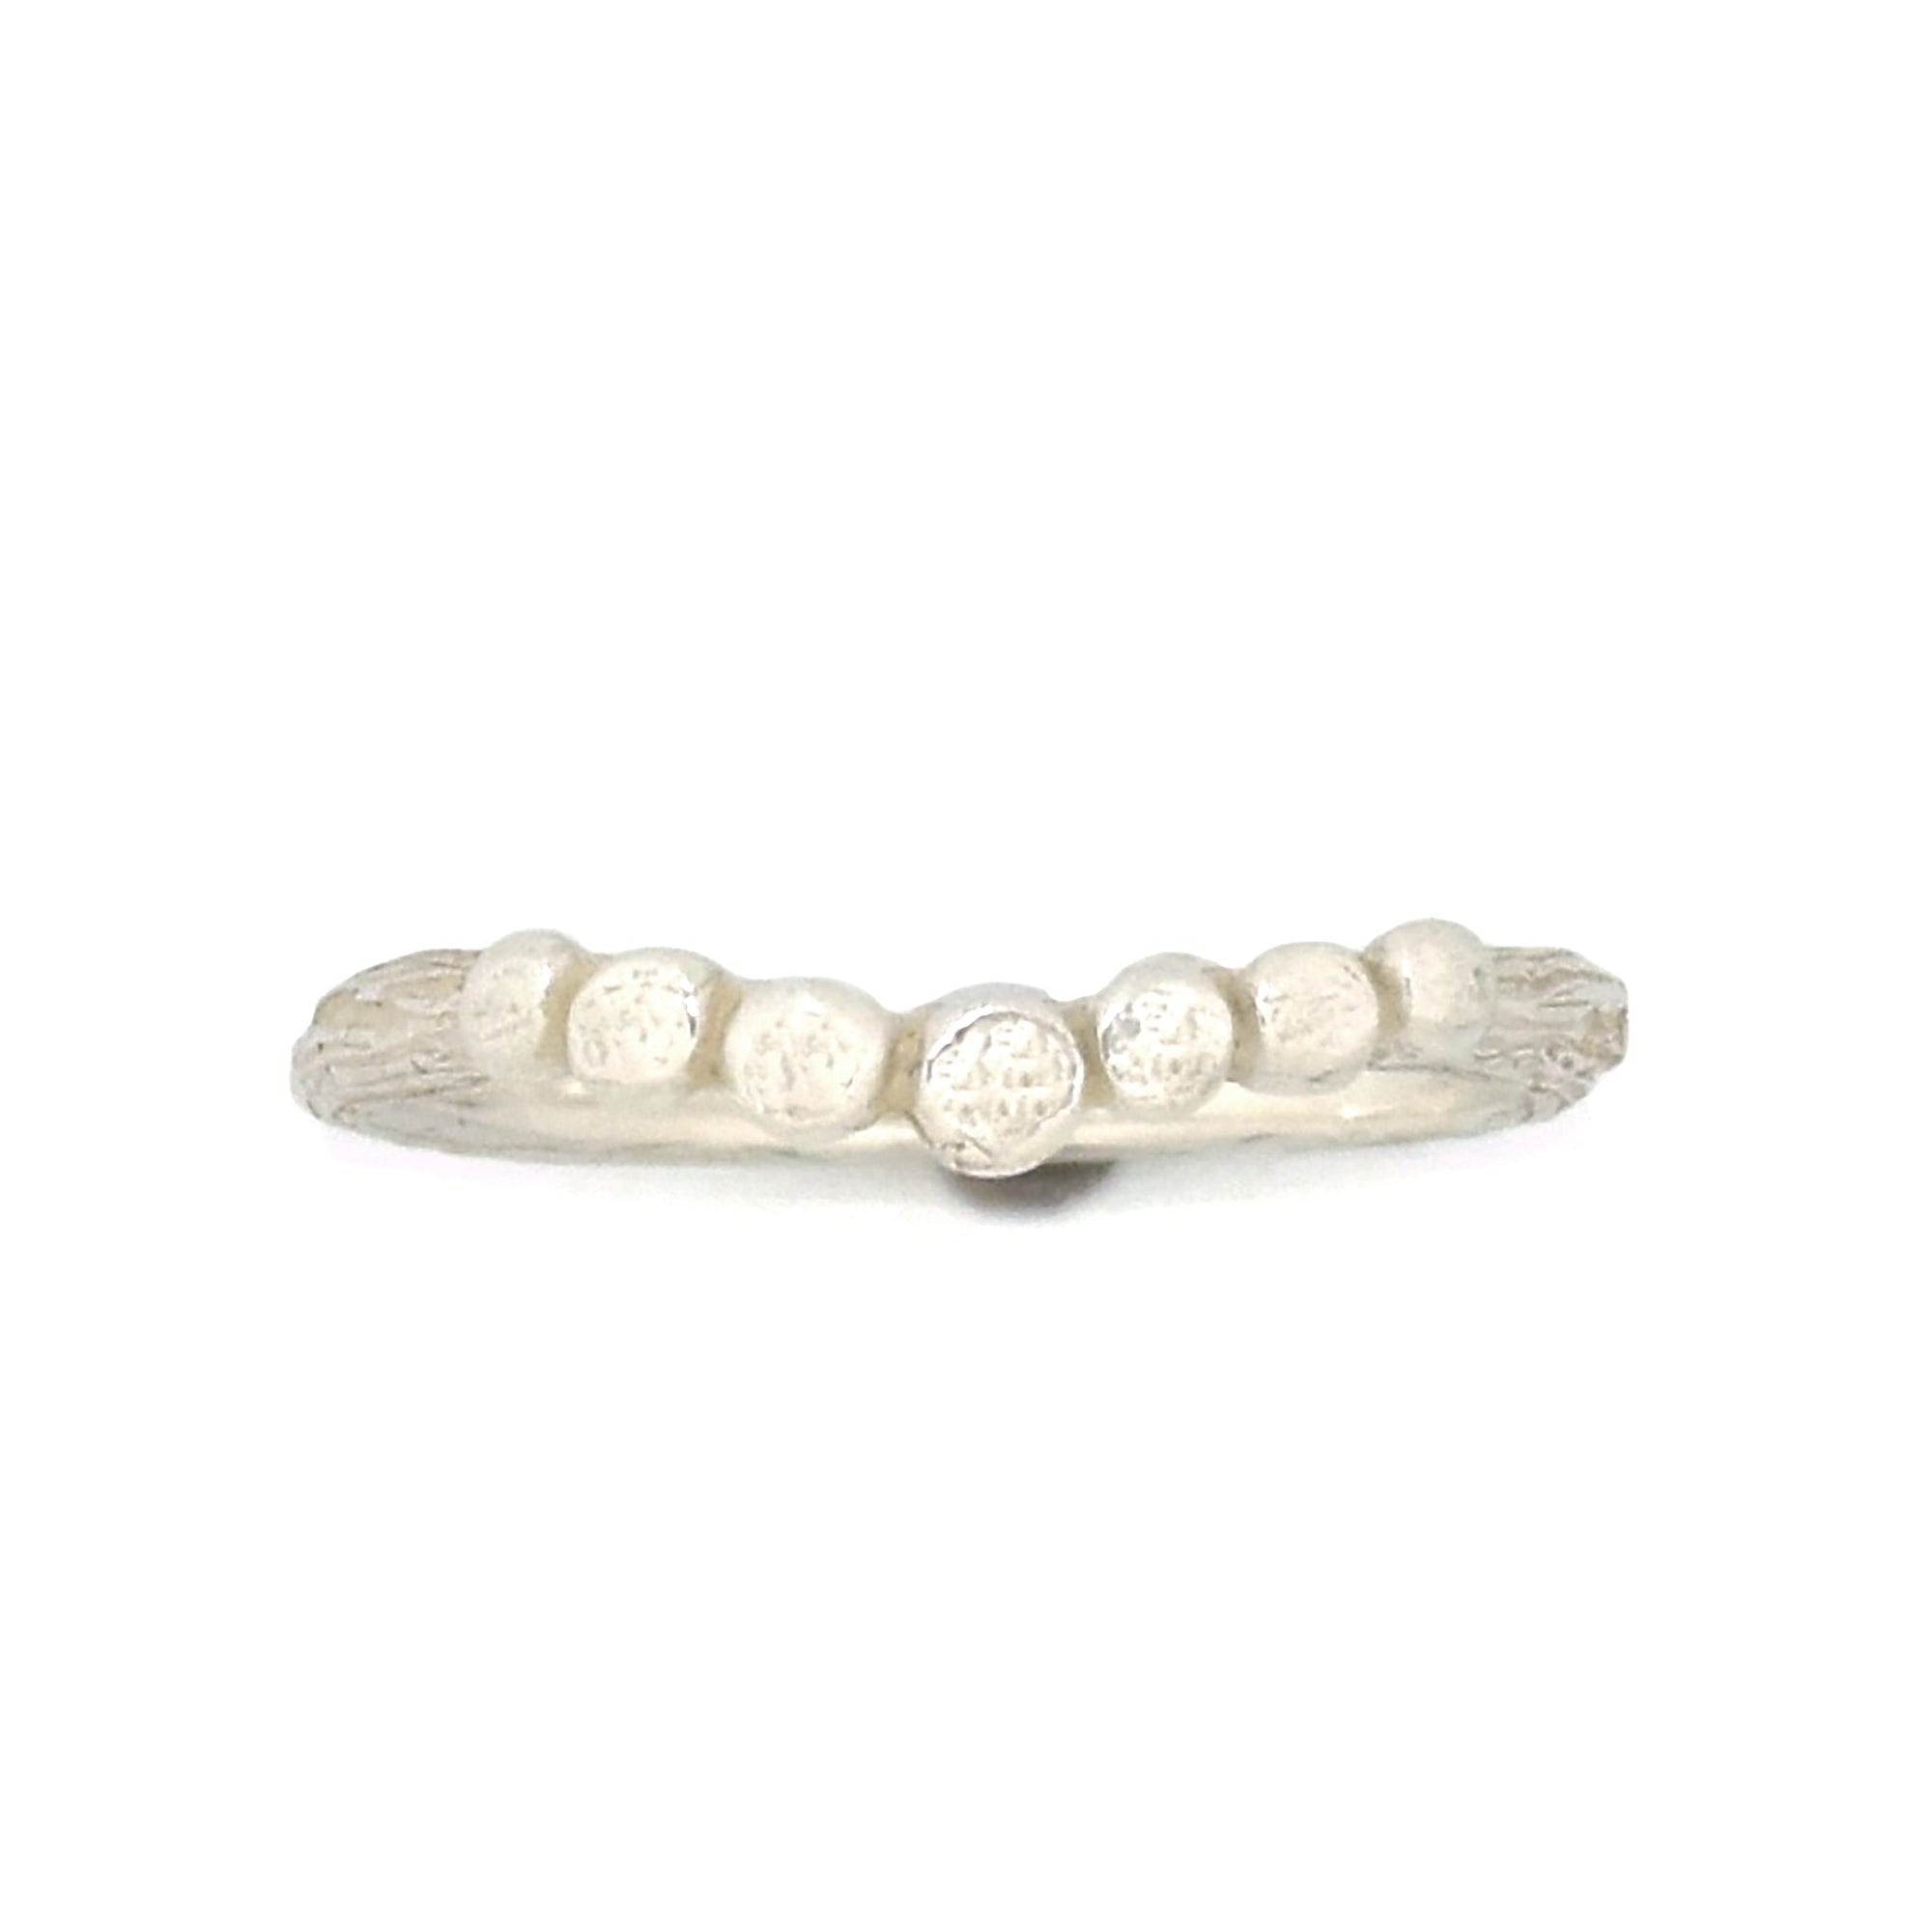 Gold Curved Pebble Twig Ring - your choice of gold & optional diamonds - Wedding Ring  18K Palladium White Gold / No diamonds  18K Palladium White Gold / 1 Diamond 6342 - handmade by Beth Millner Jewelry